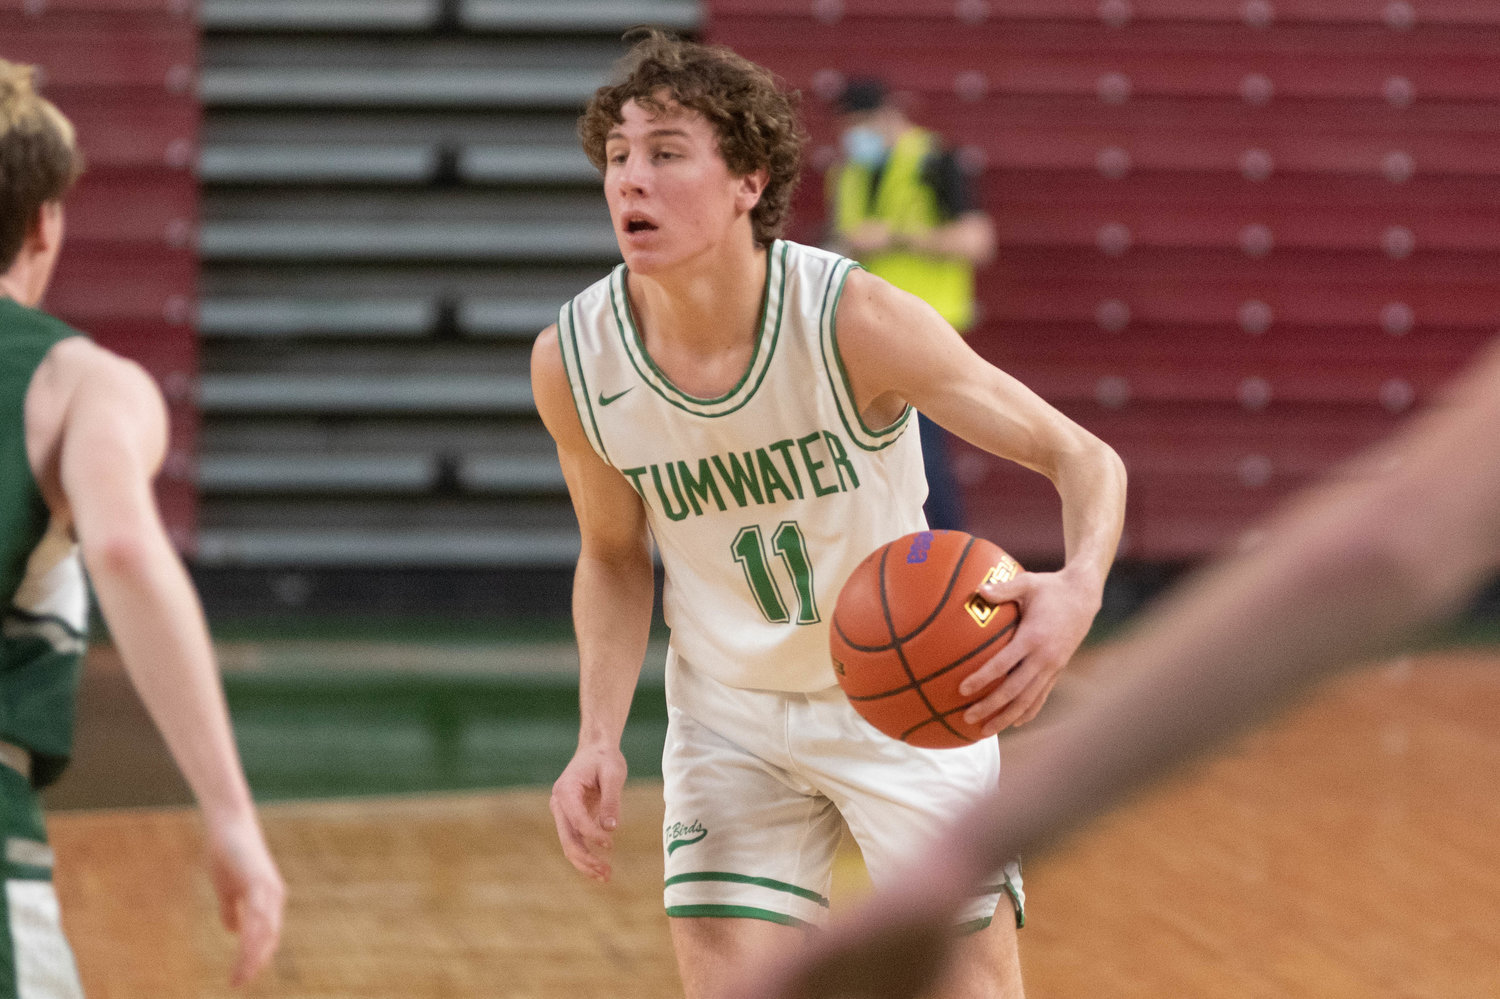 Tumwater guard Luke Brewer dribbles up the floor against Port Angeles in the 2A State Fourth-Place game at the Yakima Valley SunDome March 5.